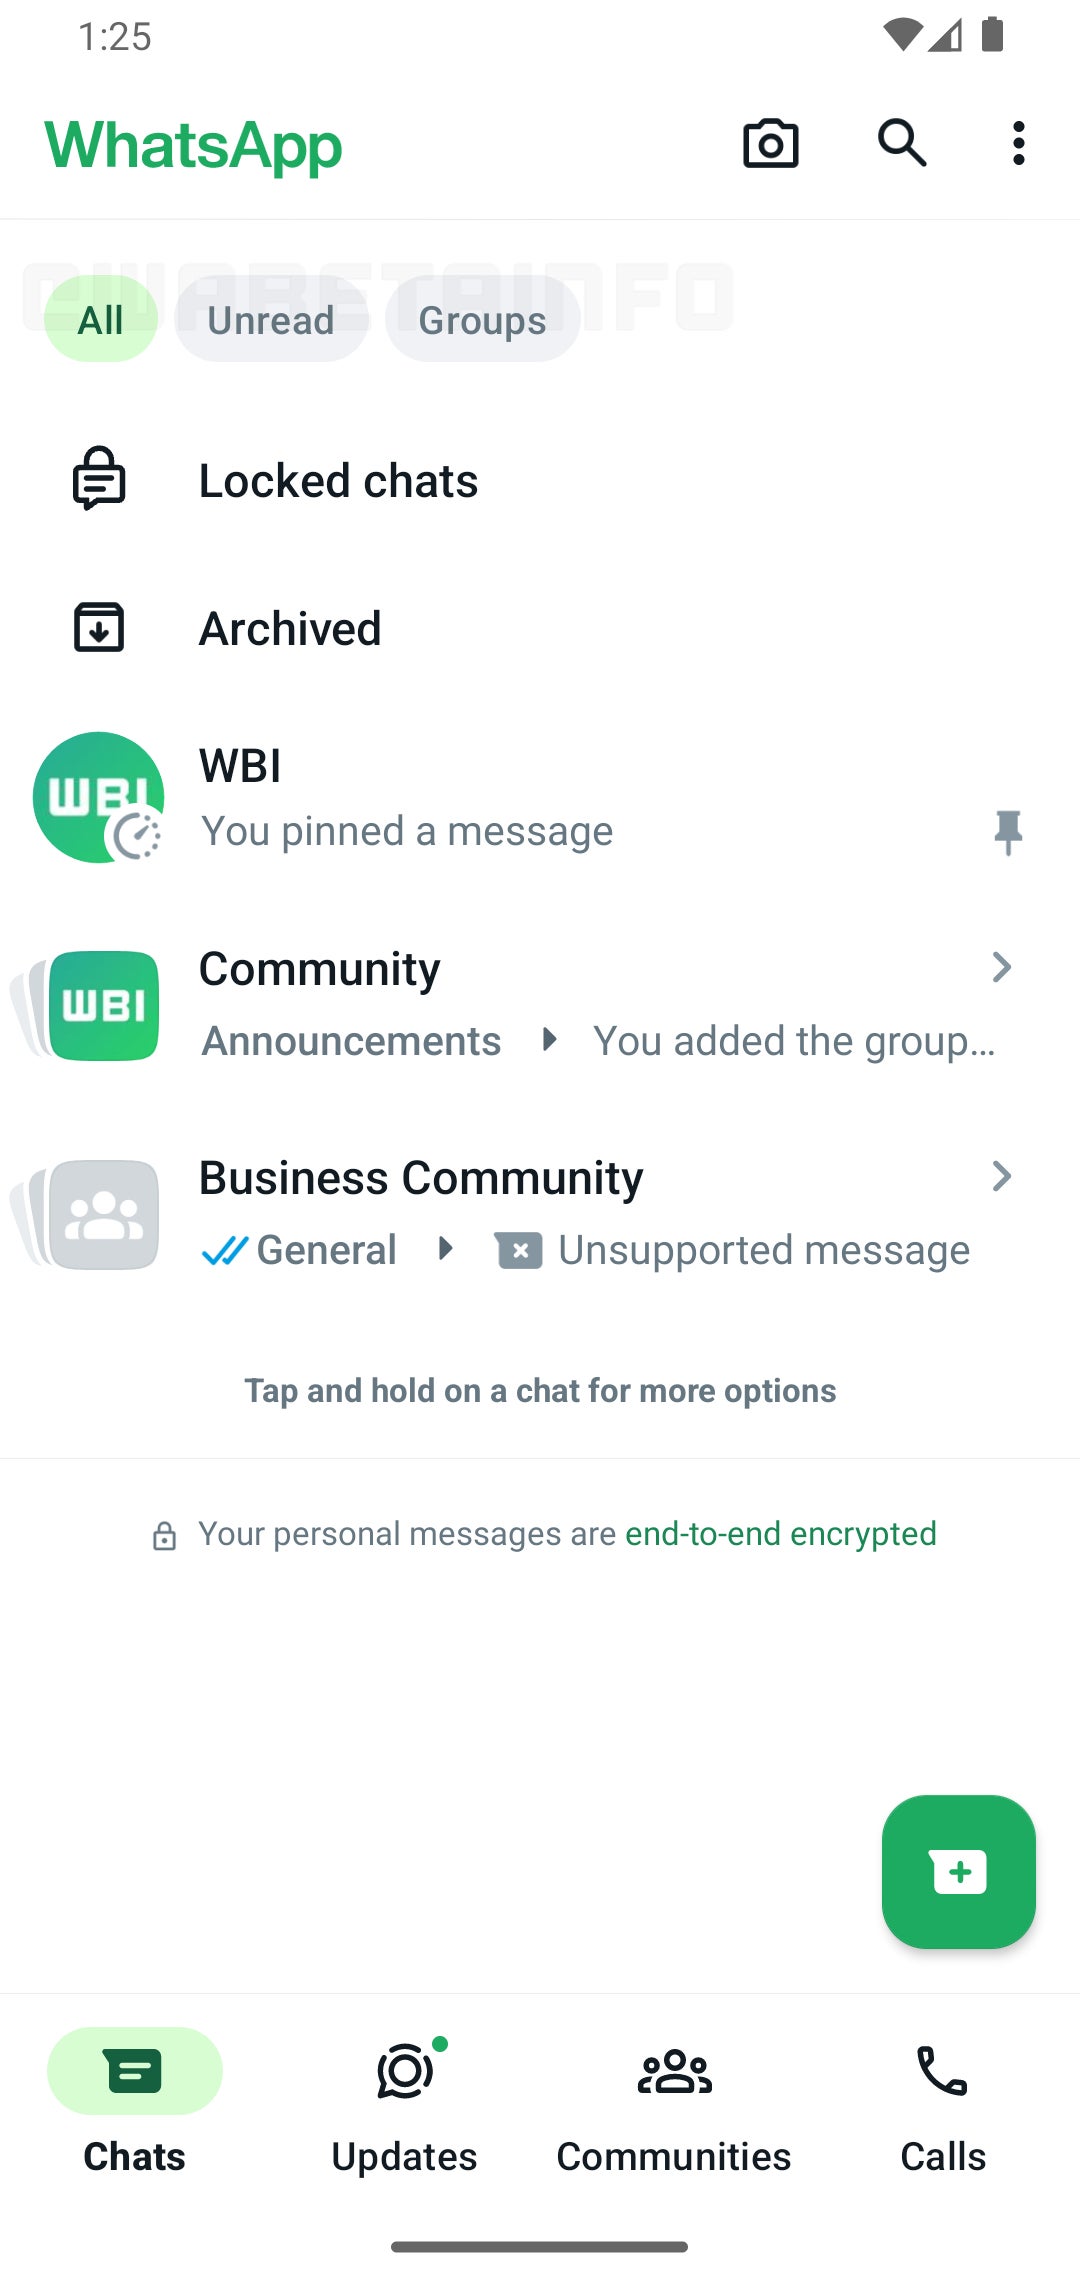 Chat filters feature in latest beta (Image credit – WABetaInfo) – WhatsApp restarts testing of long-lost chat filters feature to help you organize your chaos